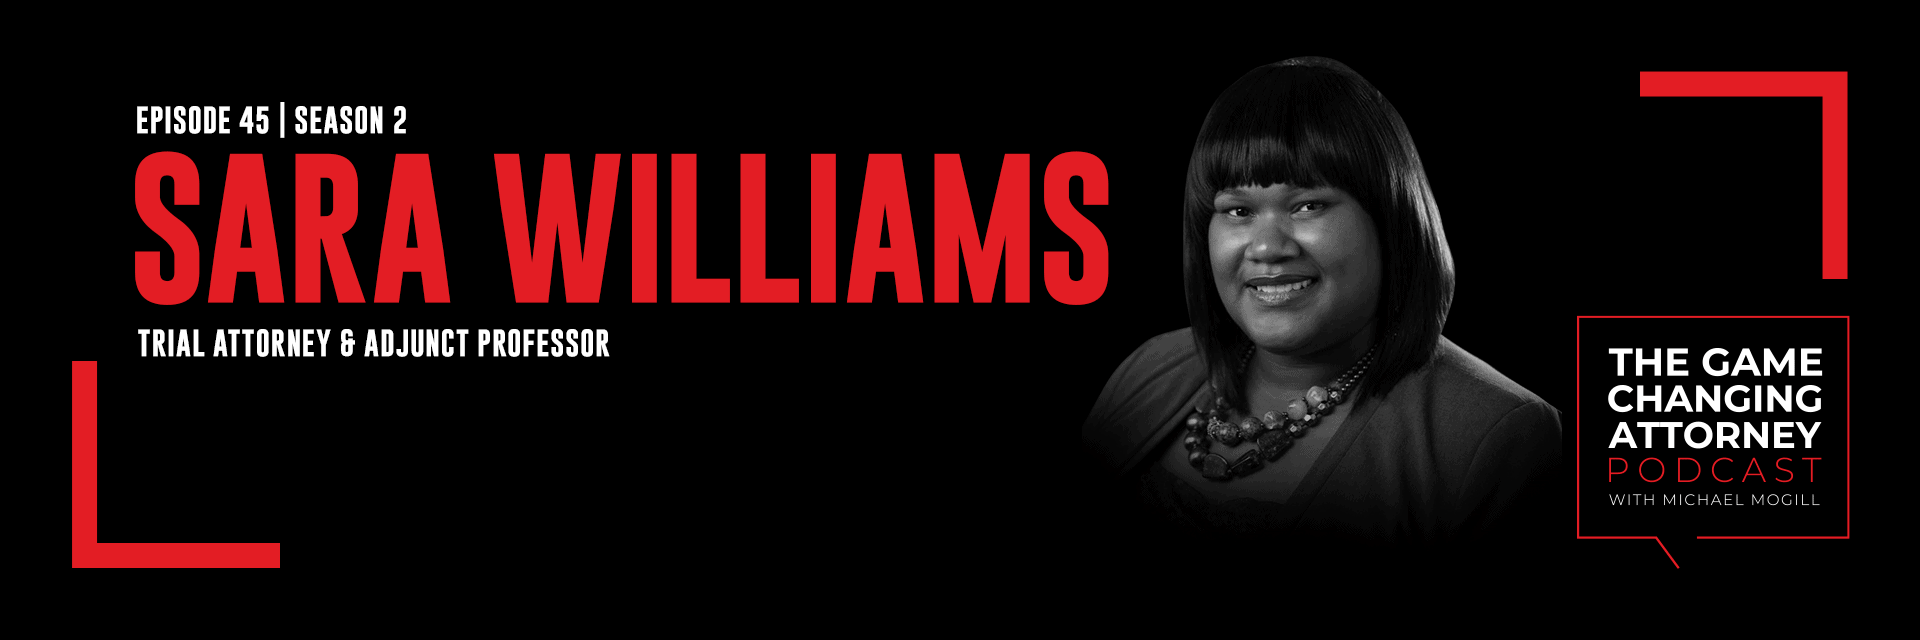 Sara Williams - The Game Changing Attorney Podcast - Desktop